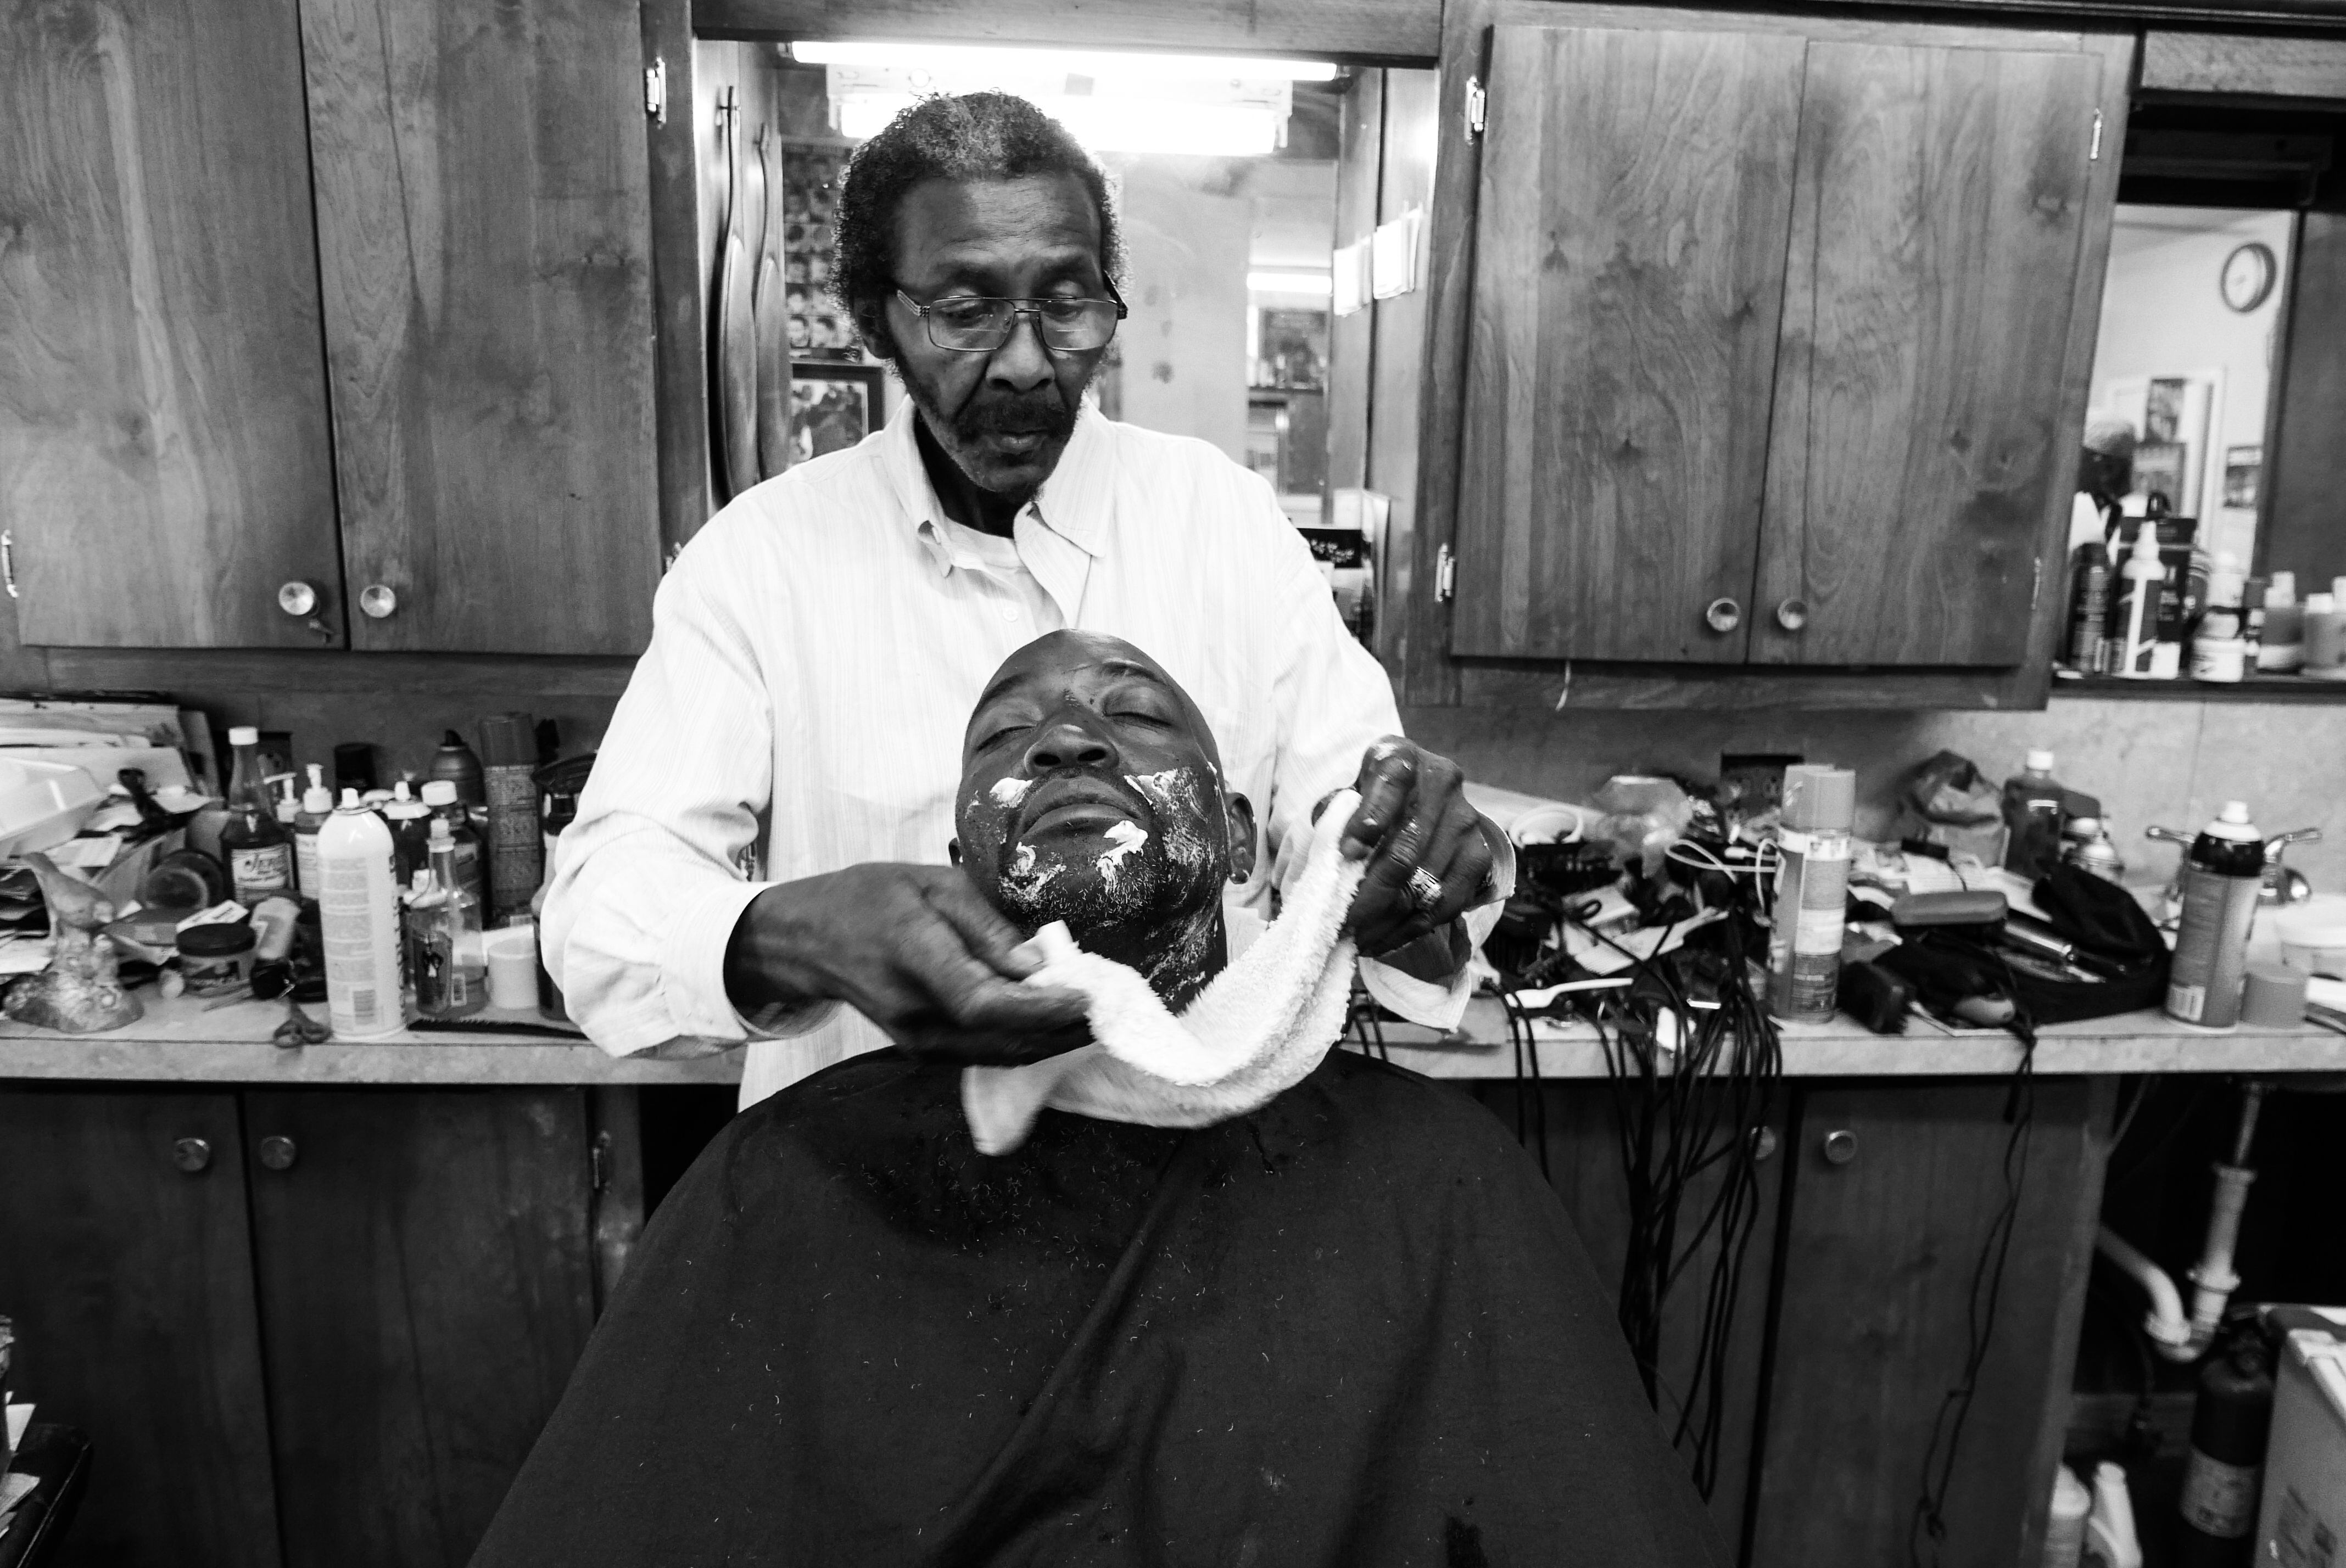 Barber Shop - Focus on African American Artists